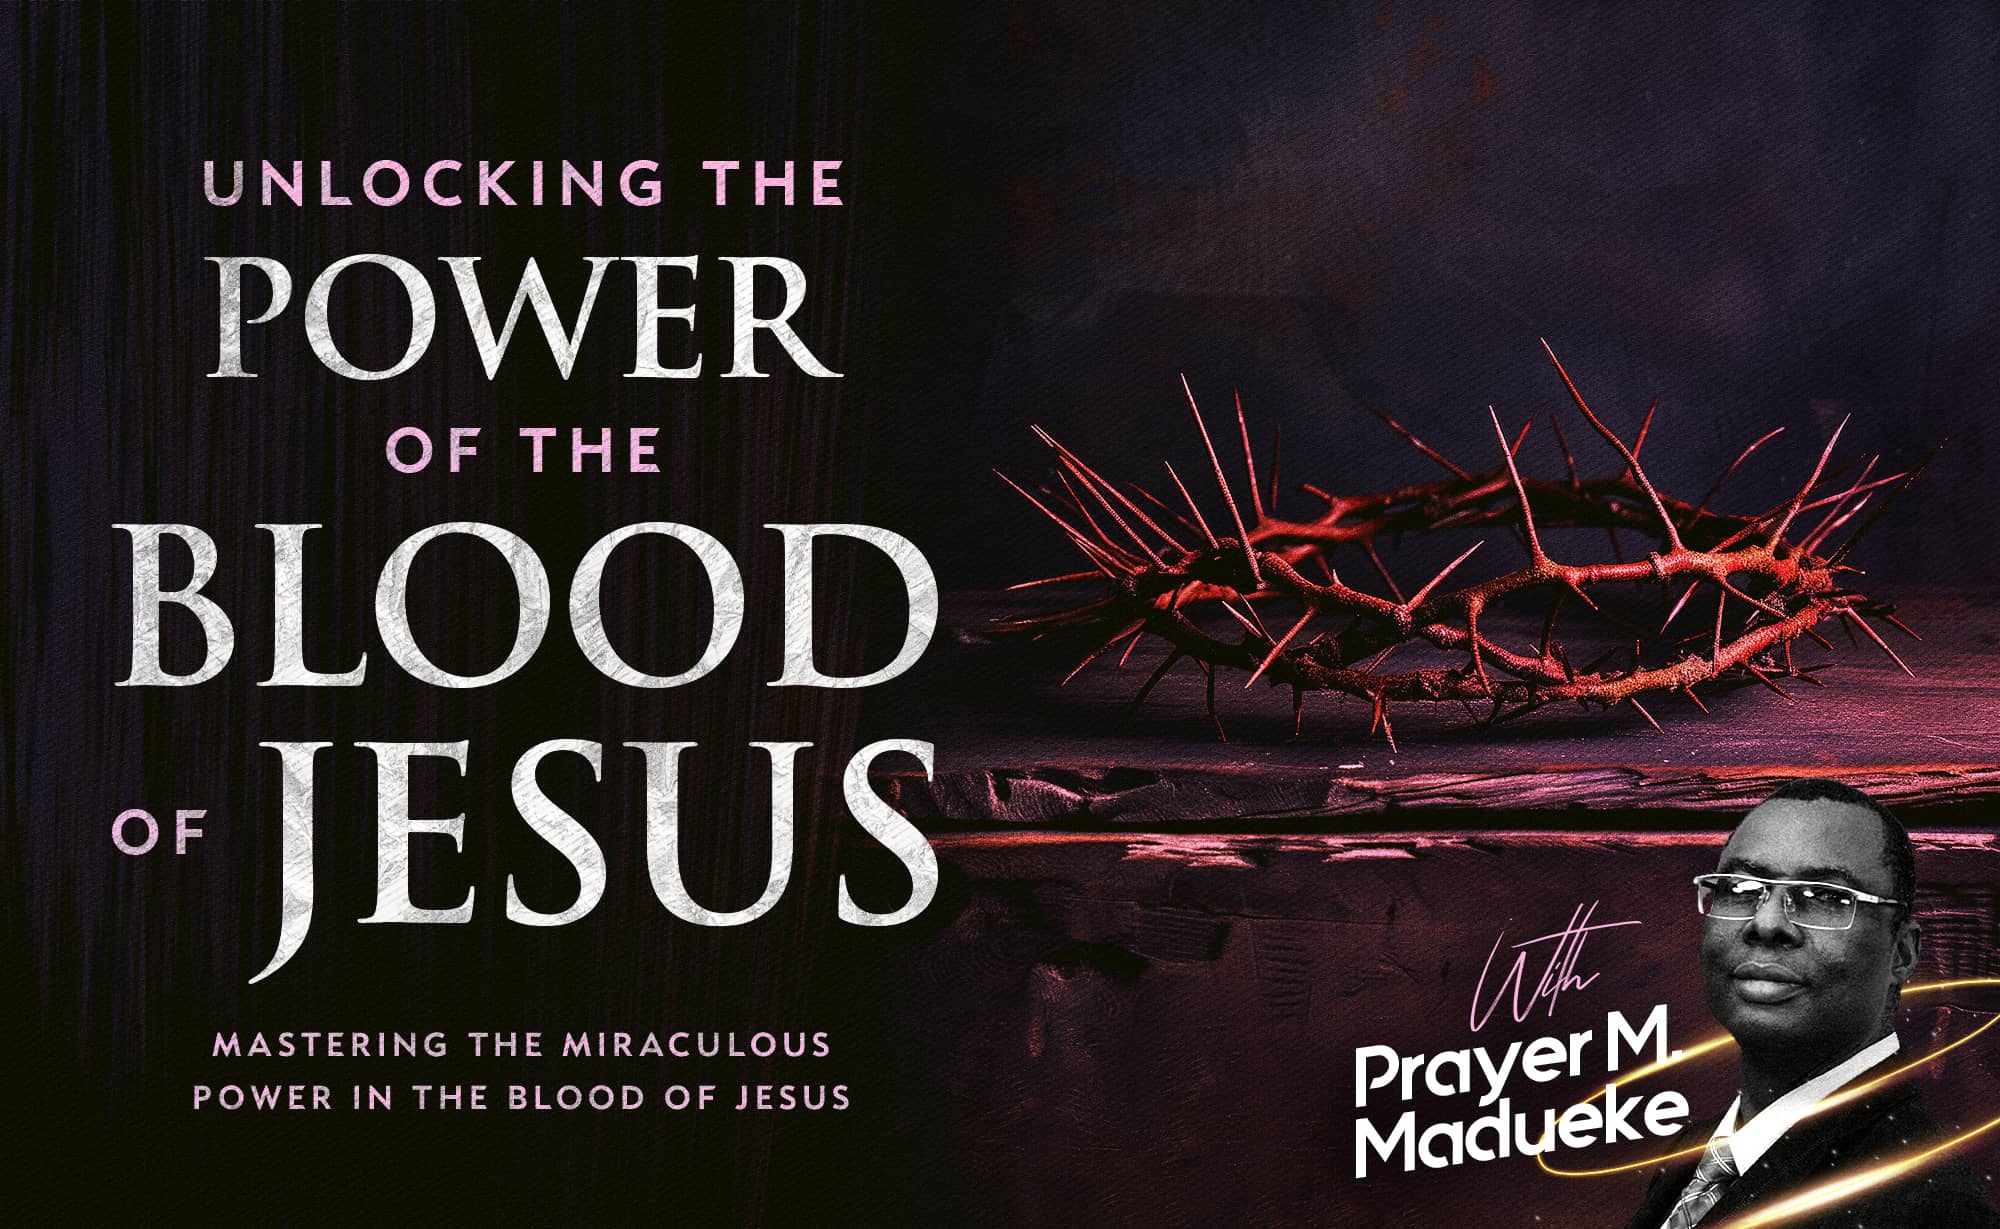 Unlocking the Power of the Blood of Jesus